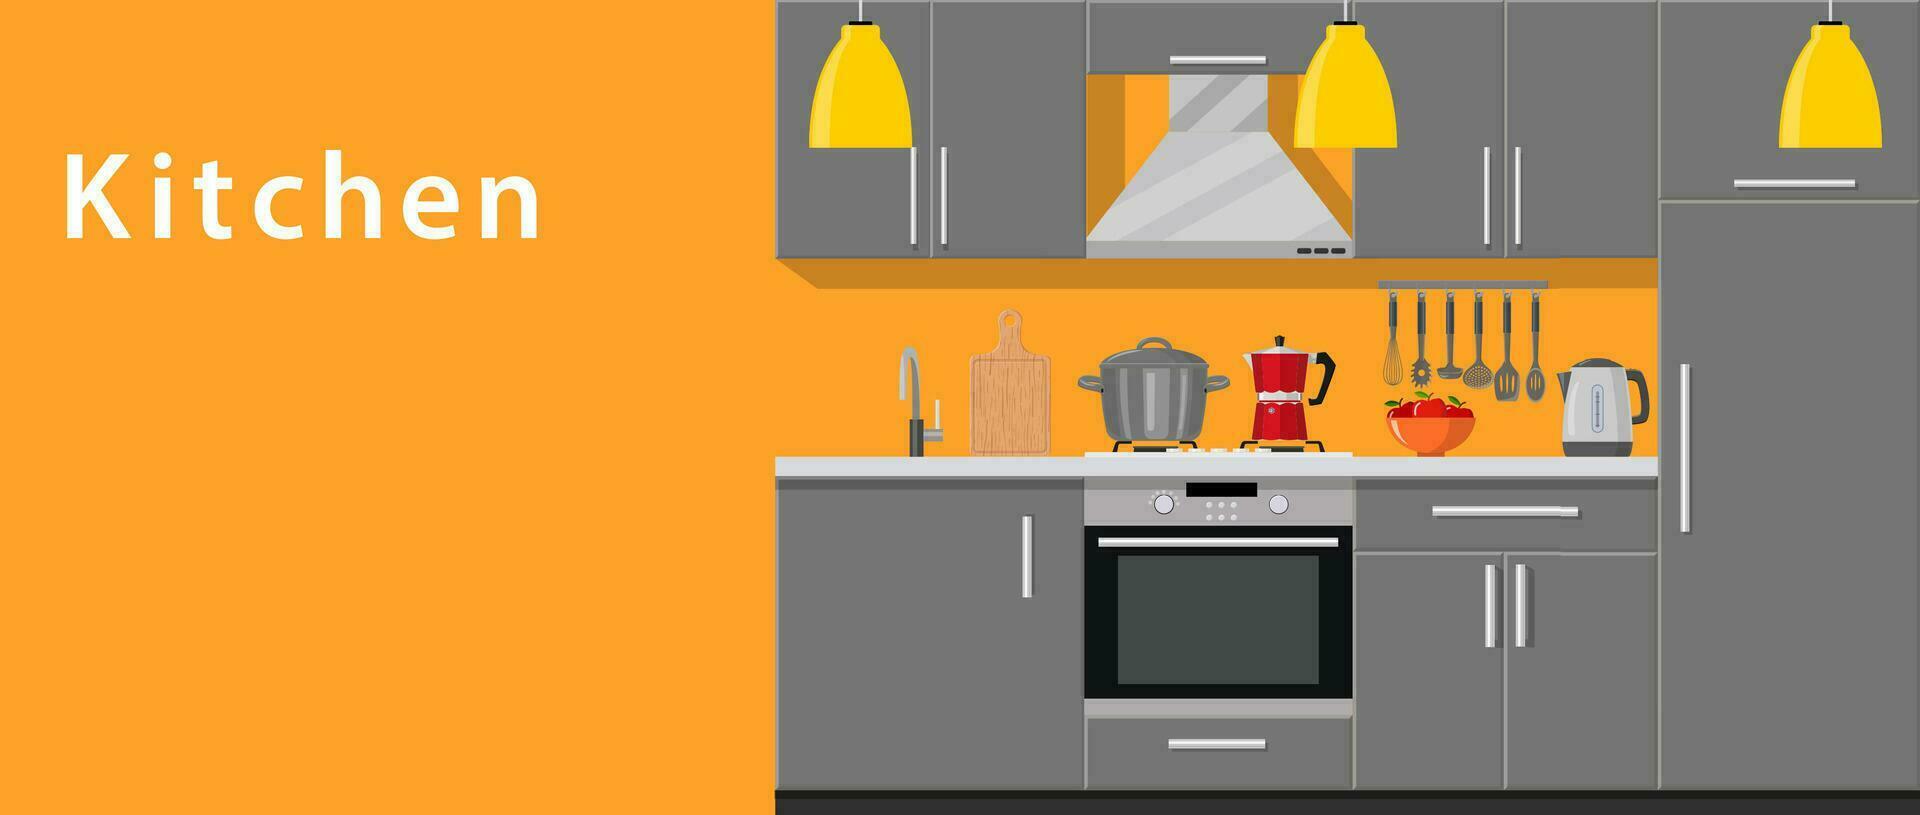 Modern kitchen interior with furniture and cooking devices. graphic design template. Working surface for cooking. vector illustration in flat design